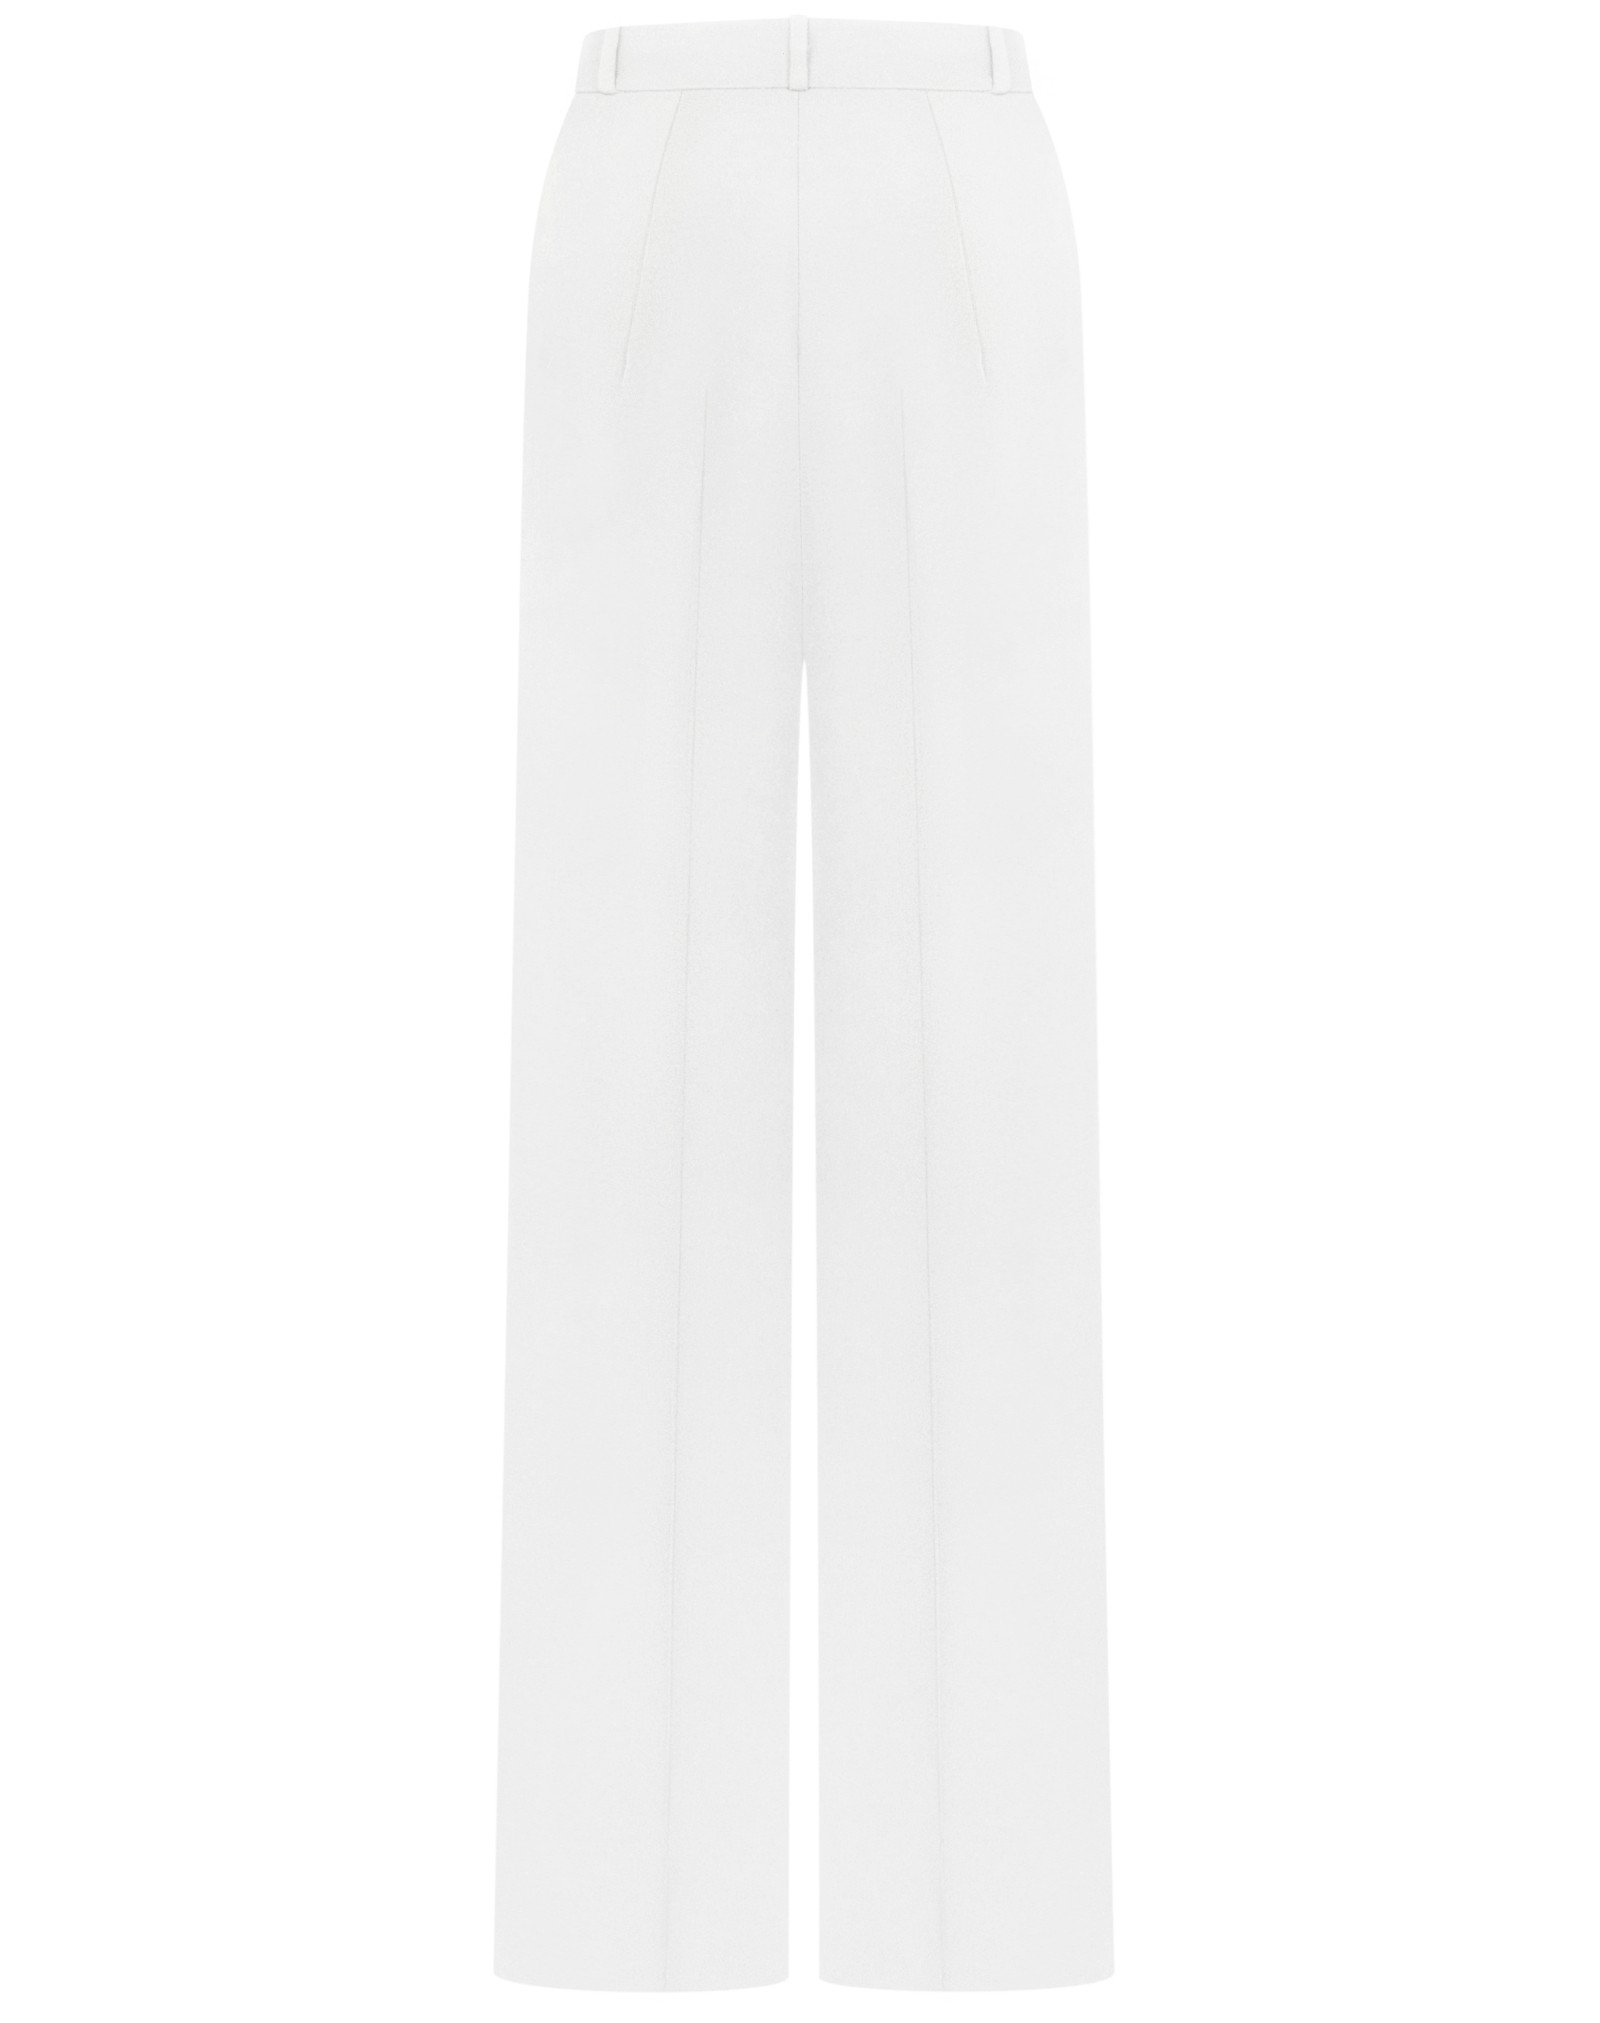 Pants with arrows made of suit fabric white